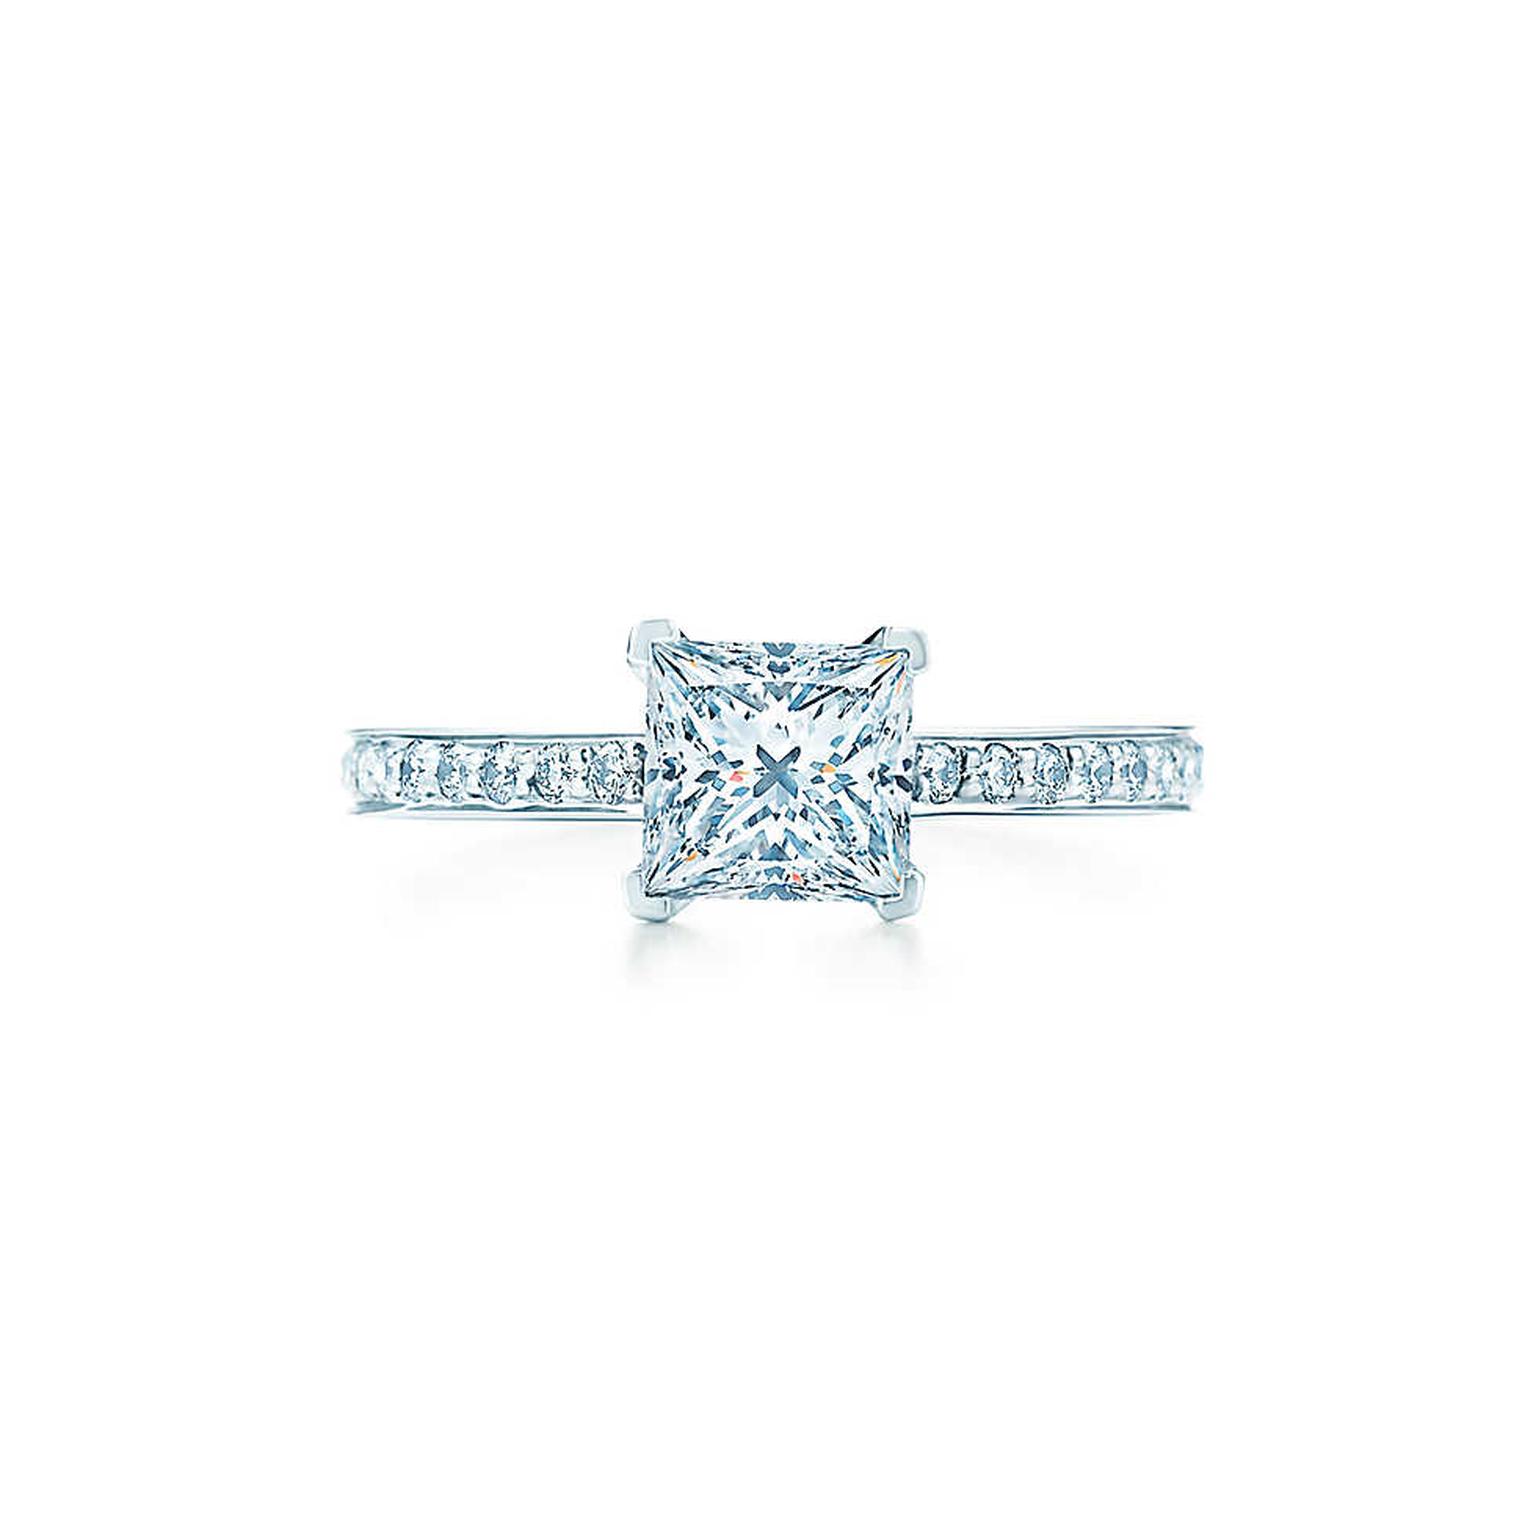 Tiffany & Co. Grace princess-cut diamond engagement ring with a diamond pavé band (from £9,850).